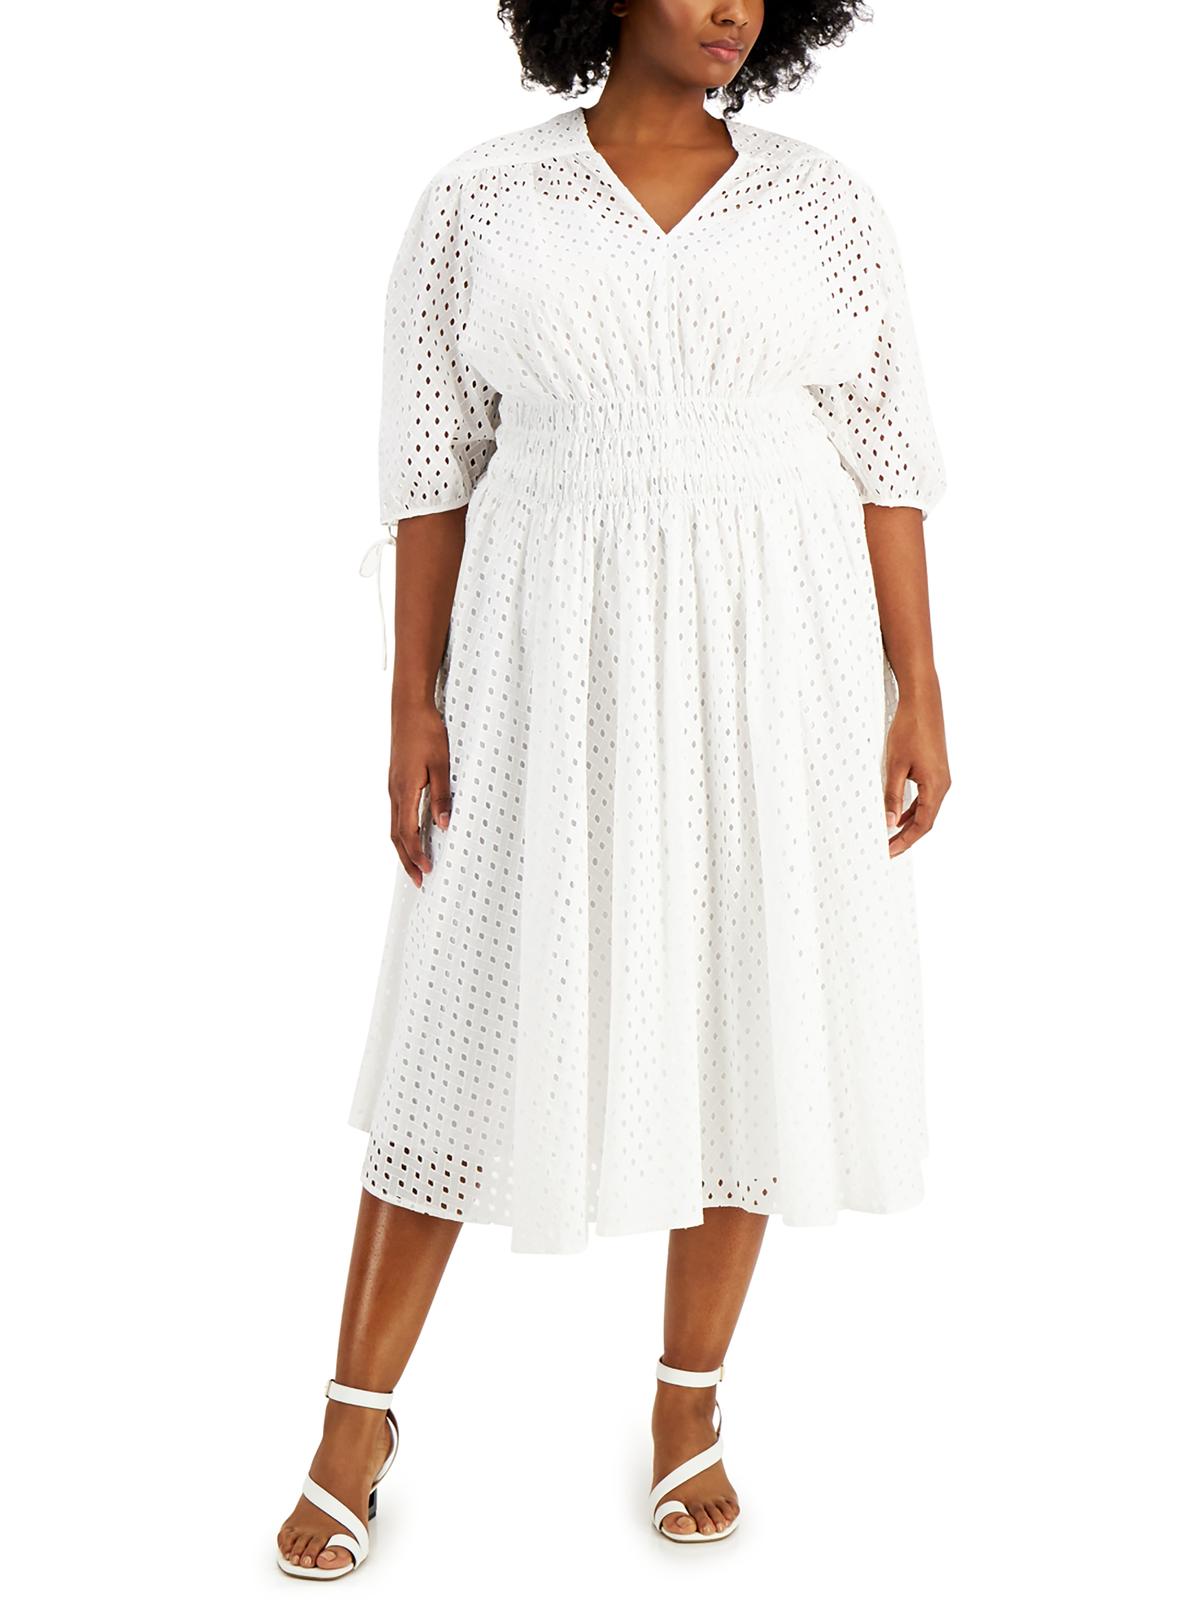 Shop Taylor Plus Womens Cotton Casual Fit & Flare Dress In White